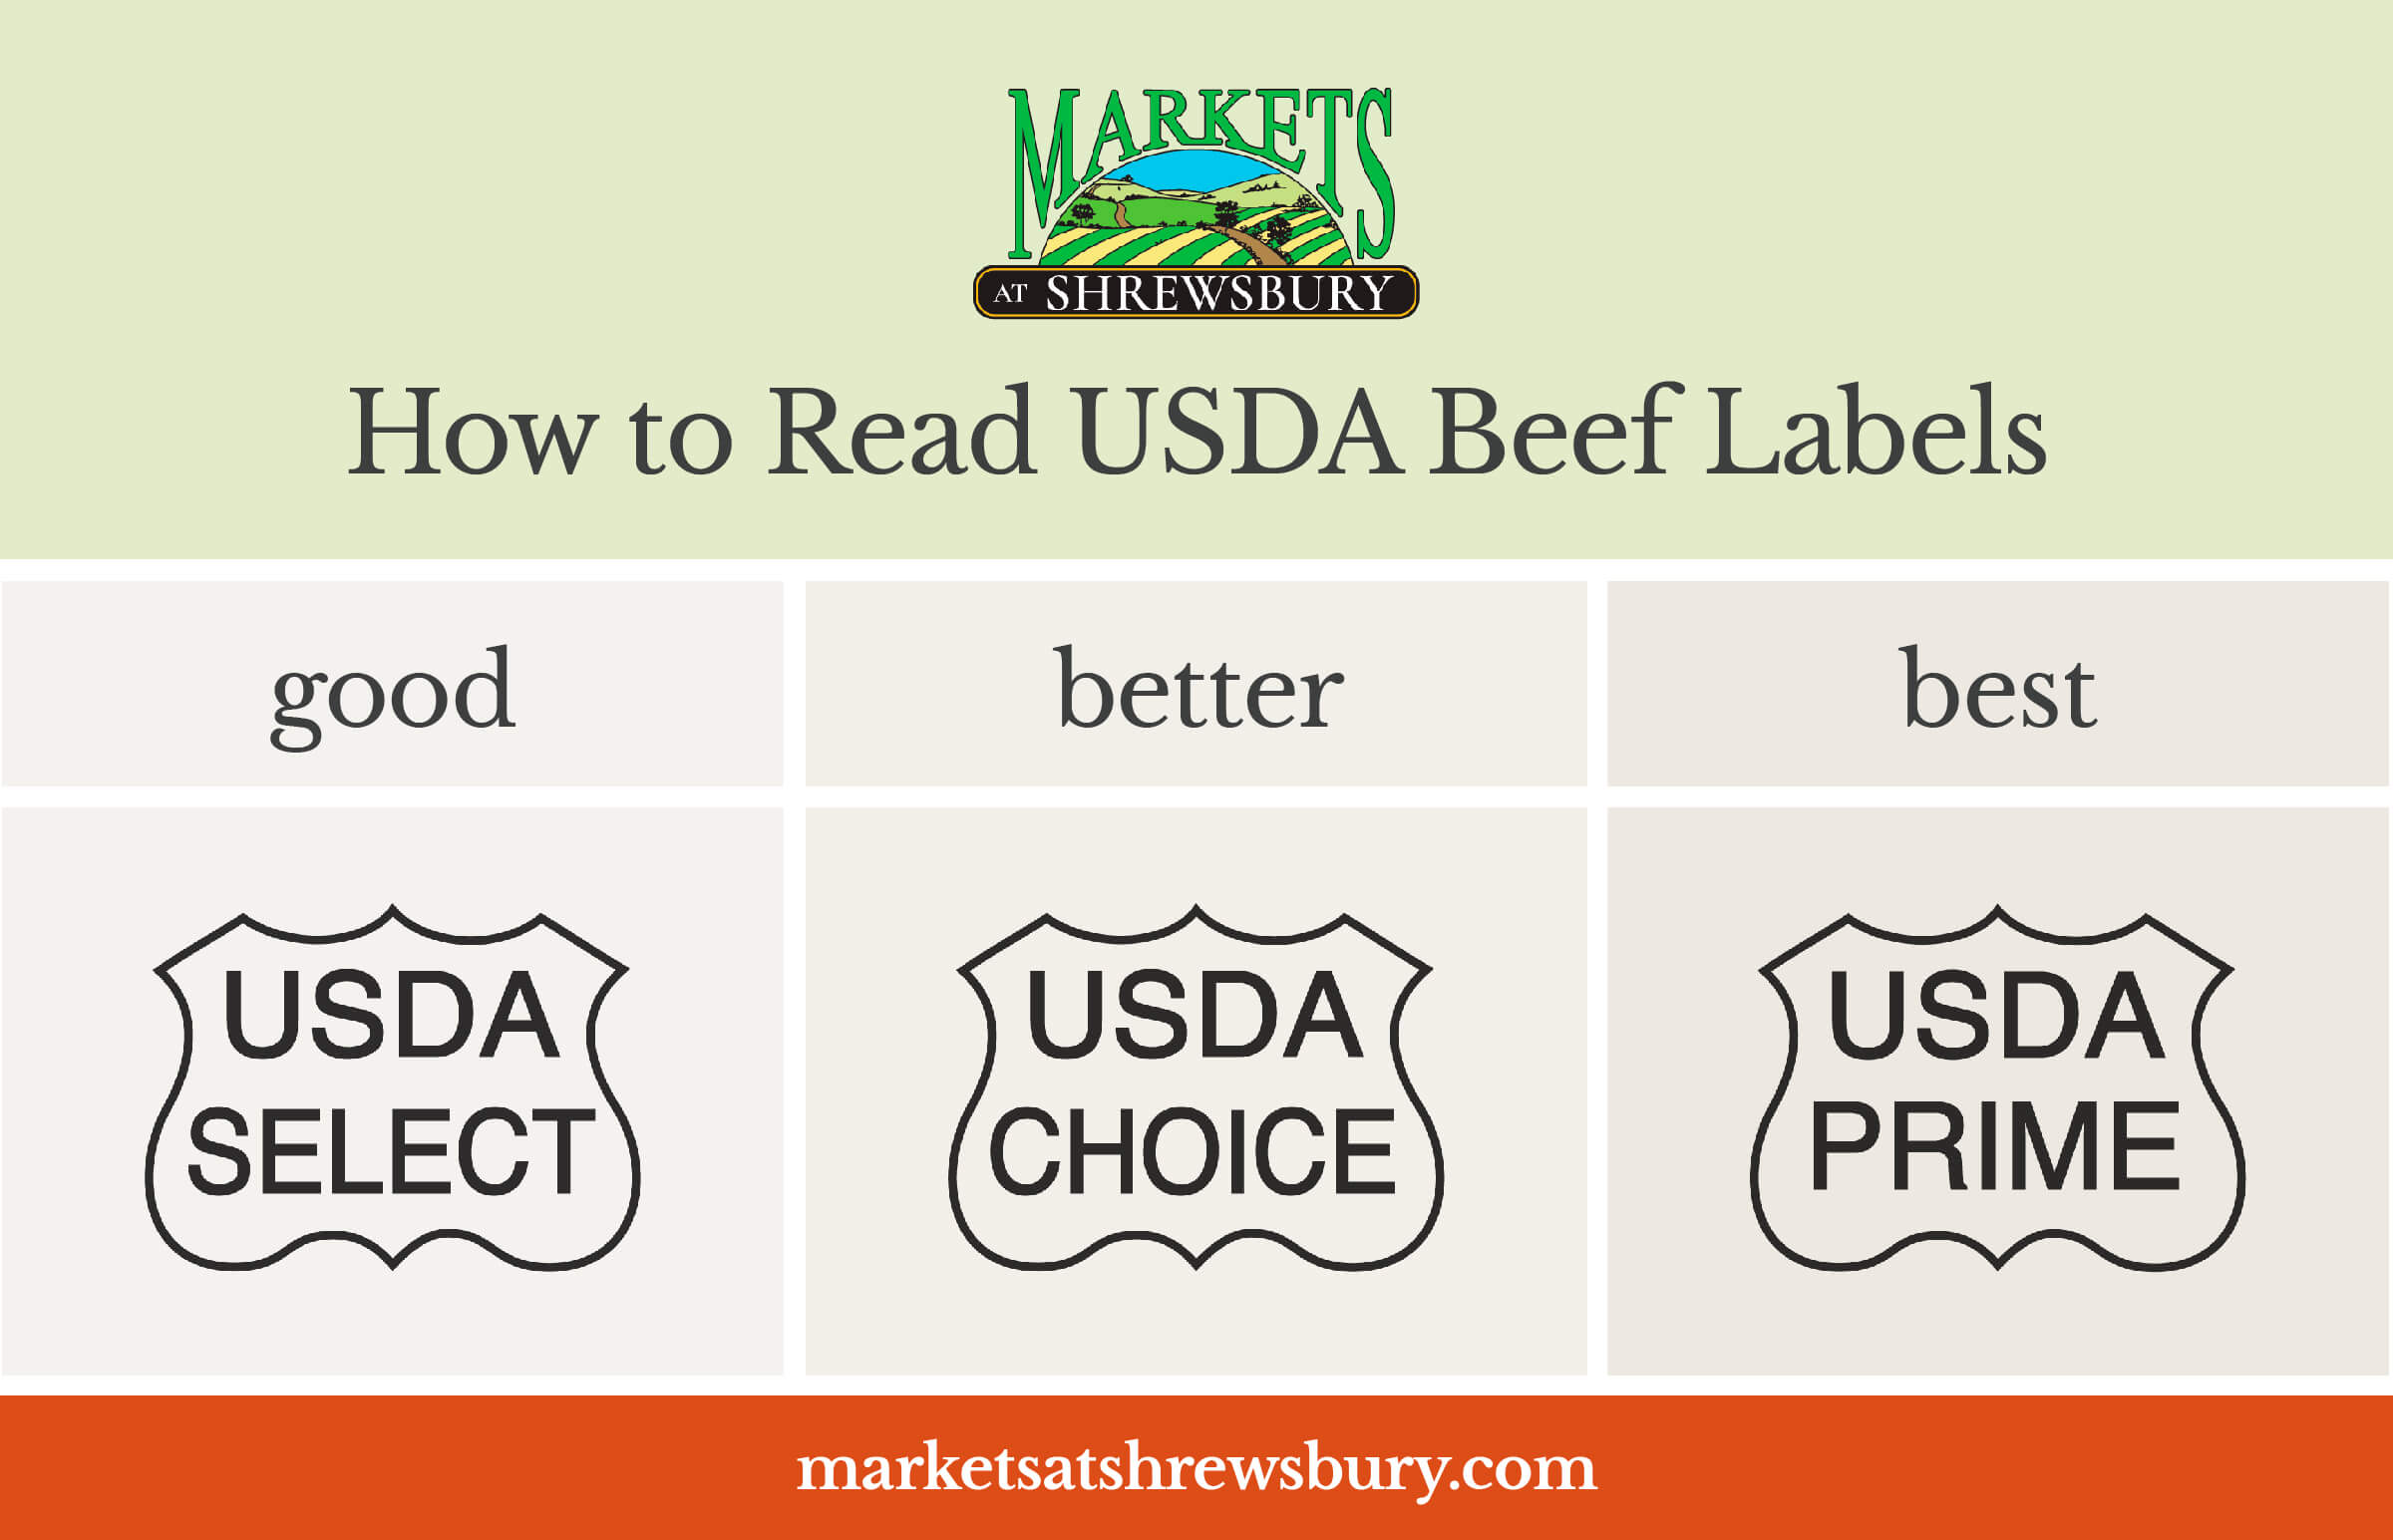 Infographic of how to read USDA beef labels